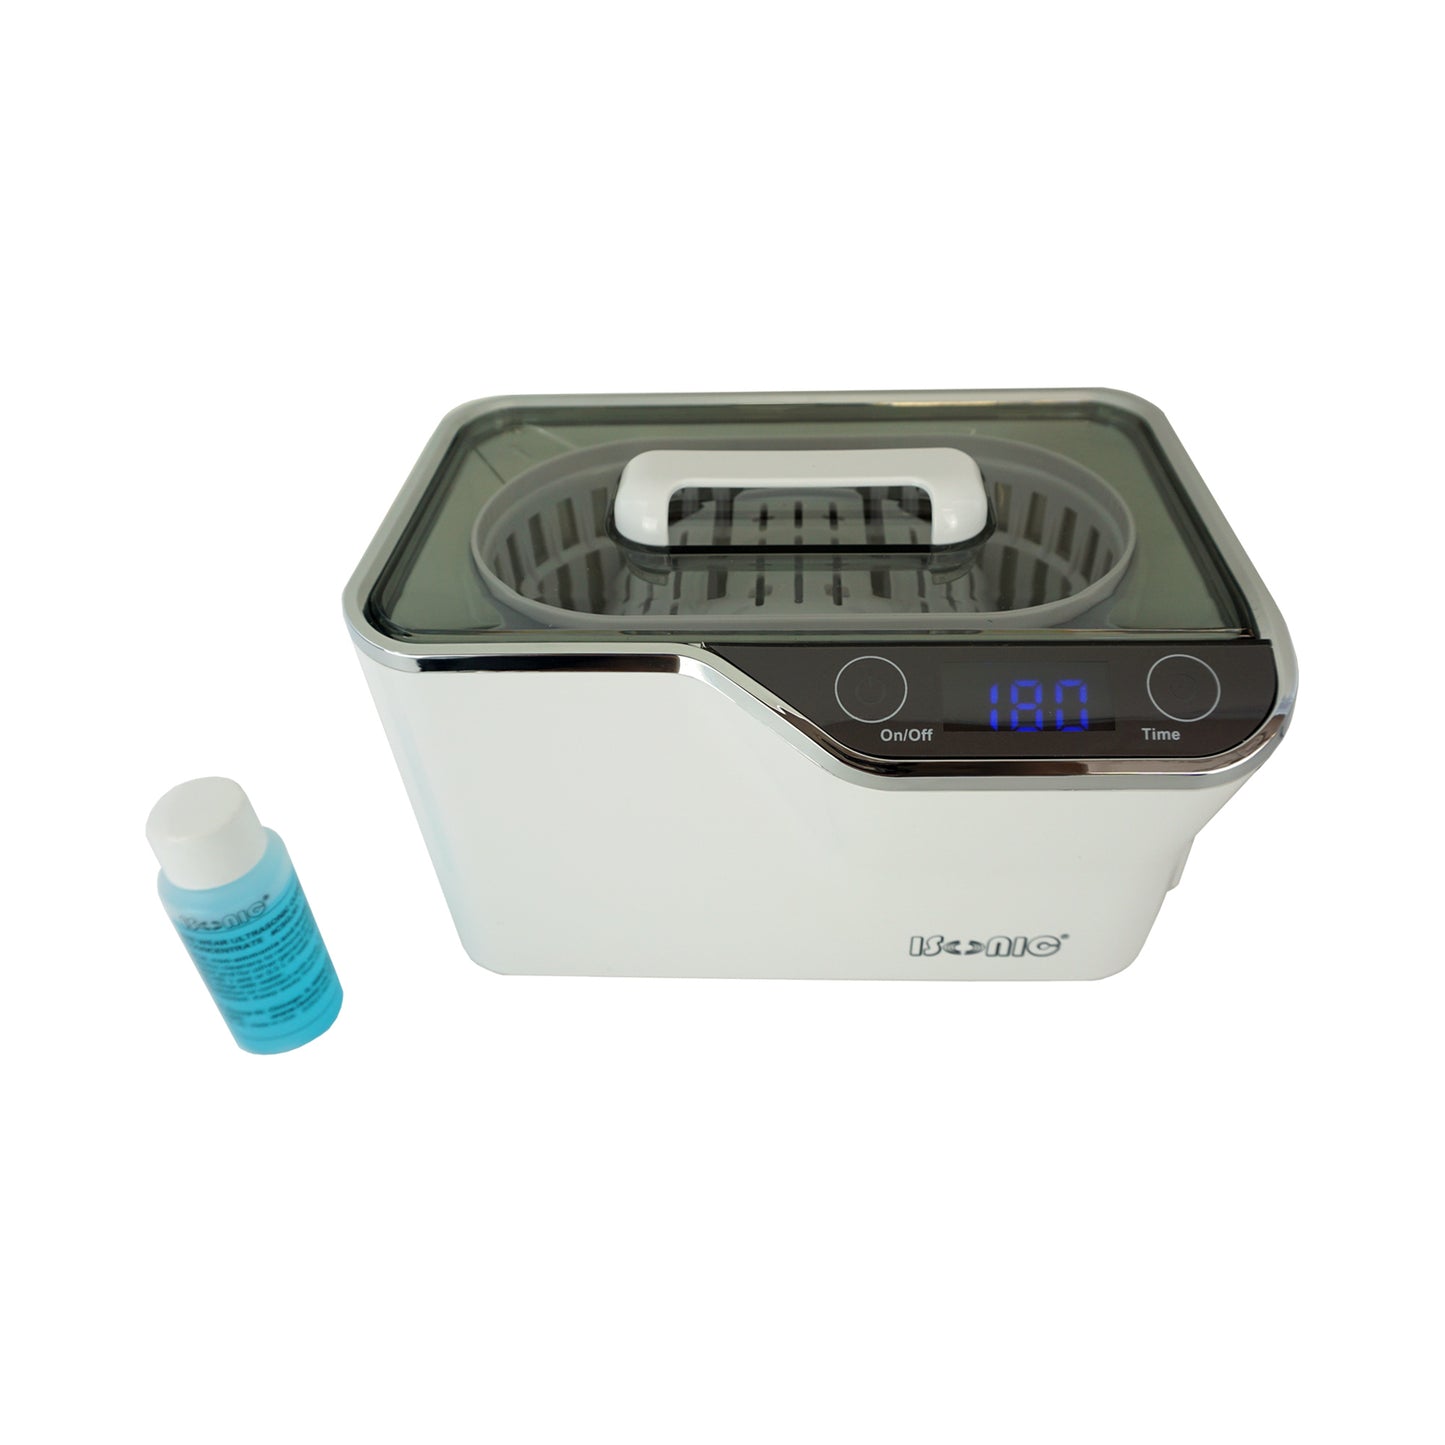 LifeBasis Portable CDS-100 Ultrasonic Jewelry Cleaner 600ML With Touch